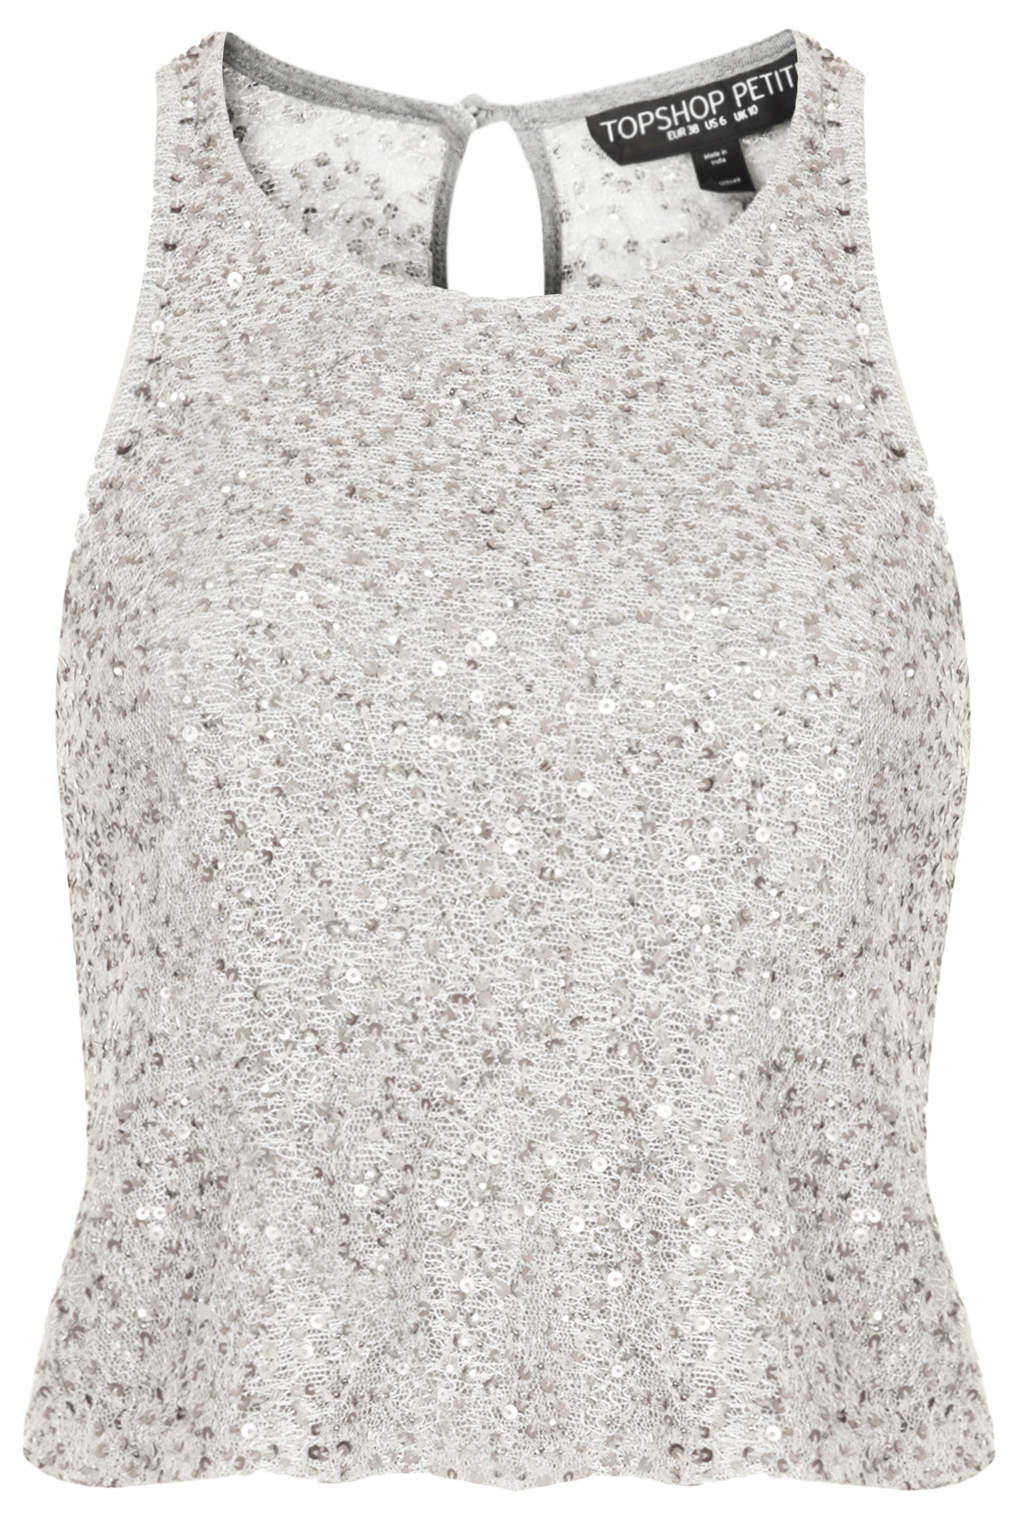 Topshop Petite All Over Sequin Shell Top in Metallic | Lyst